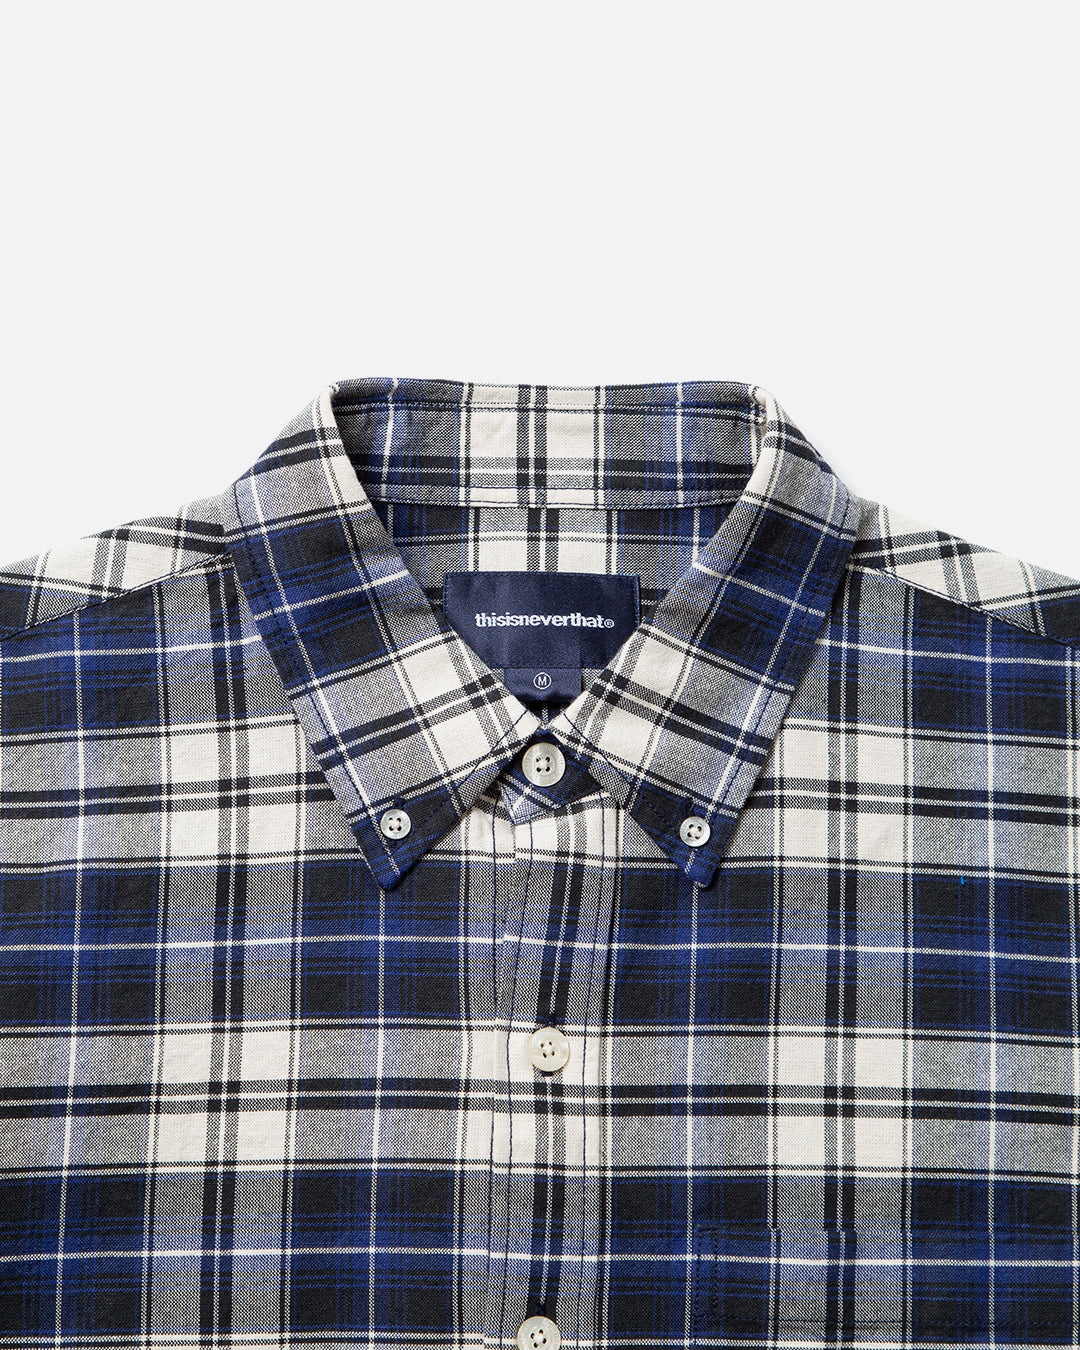 thisisneverthat T.N.T Plaid Shirt in Navy | Blues Store